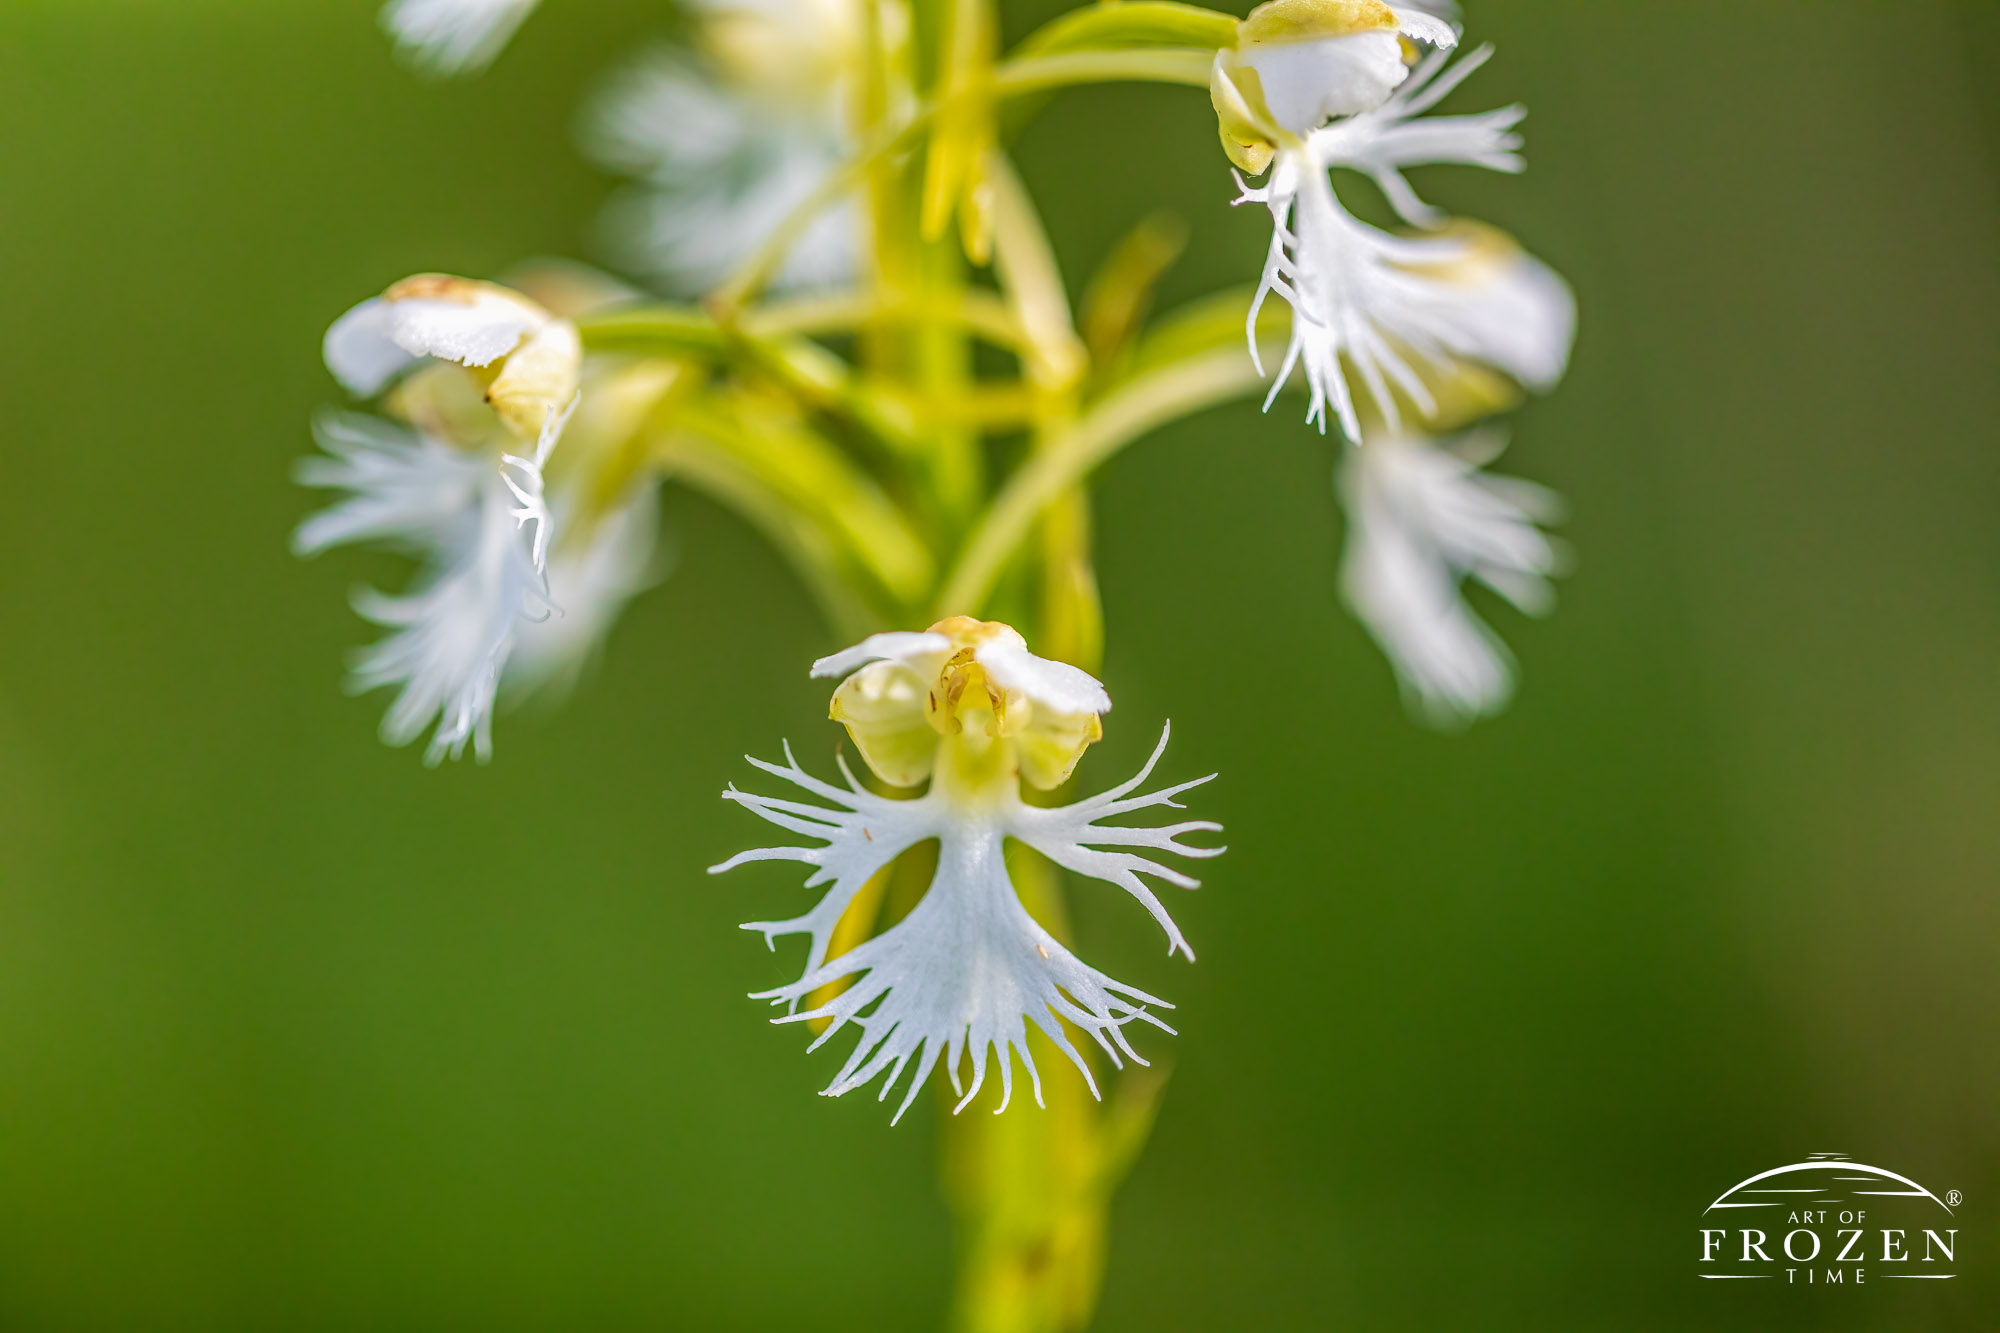 The Eastern Prairie Fringed Orchid (Platanthera leucophaea) is protected under the Endangered Species Act.  In what used to be abundant in Ohio, is now a rarity.  The USDA reports that agriculture wiped out the habitat coupled with the only believed species that can pollinate the flower is the Sphinx Moth.  The moth is only active at night and the bloom only lasts 7 to 10 days.  ONDR reports the orchid was rediscovered in 1972 after a 64-year void…from a single corn field.  On this day, I found three plants in the whole park.